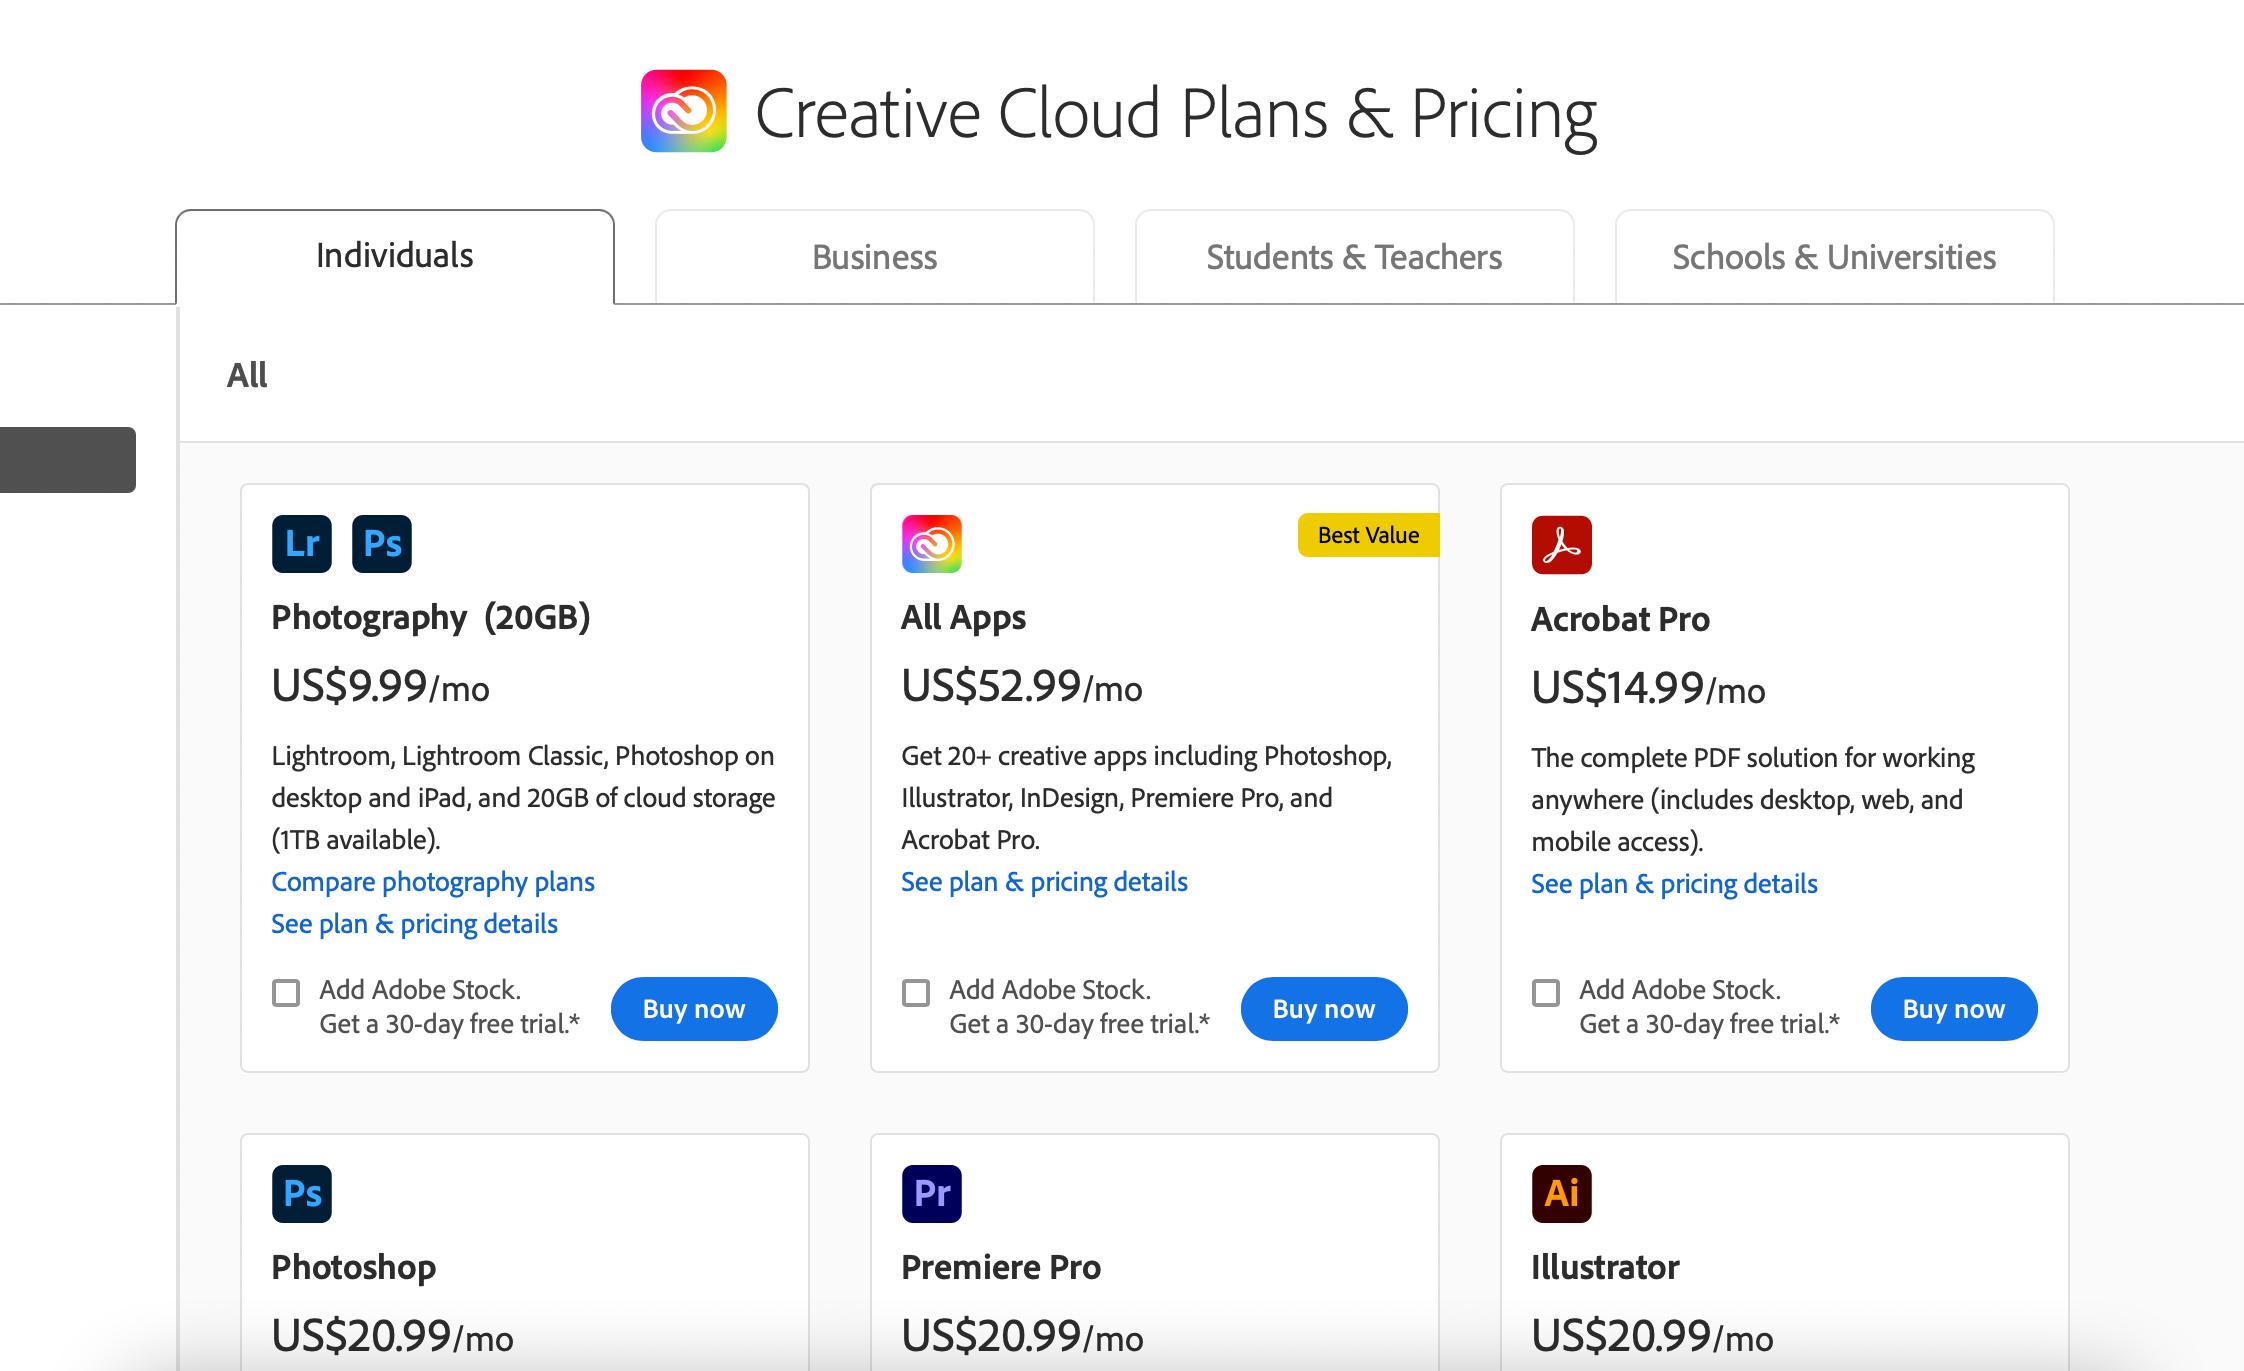 Adobe Premiere Pro pricing page information